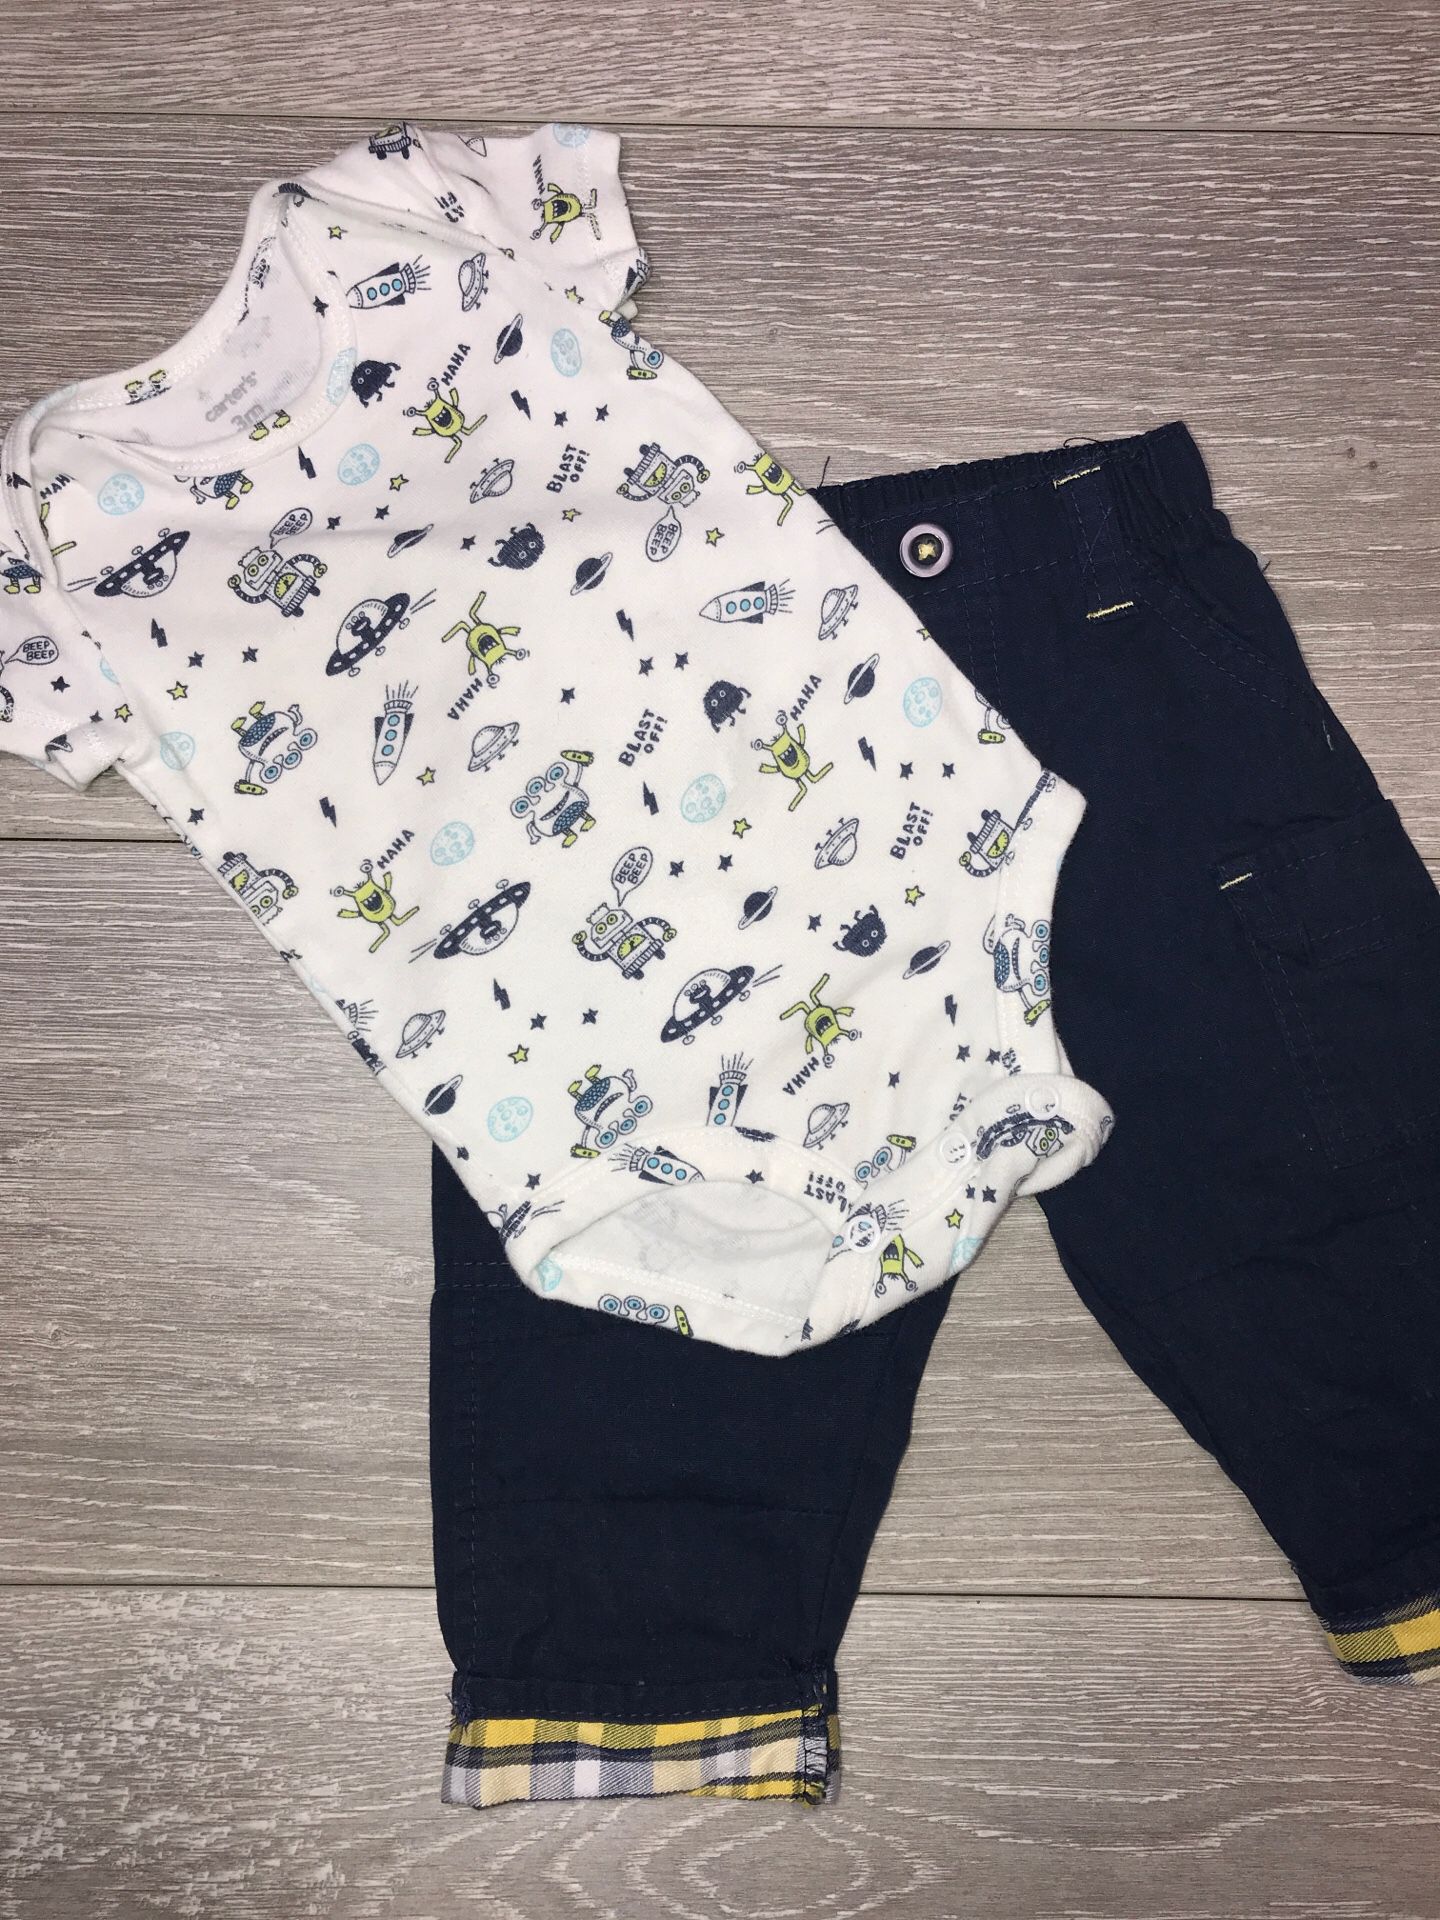 Baby Boy Clothing 3 Months $2.50 (PP)